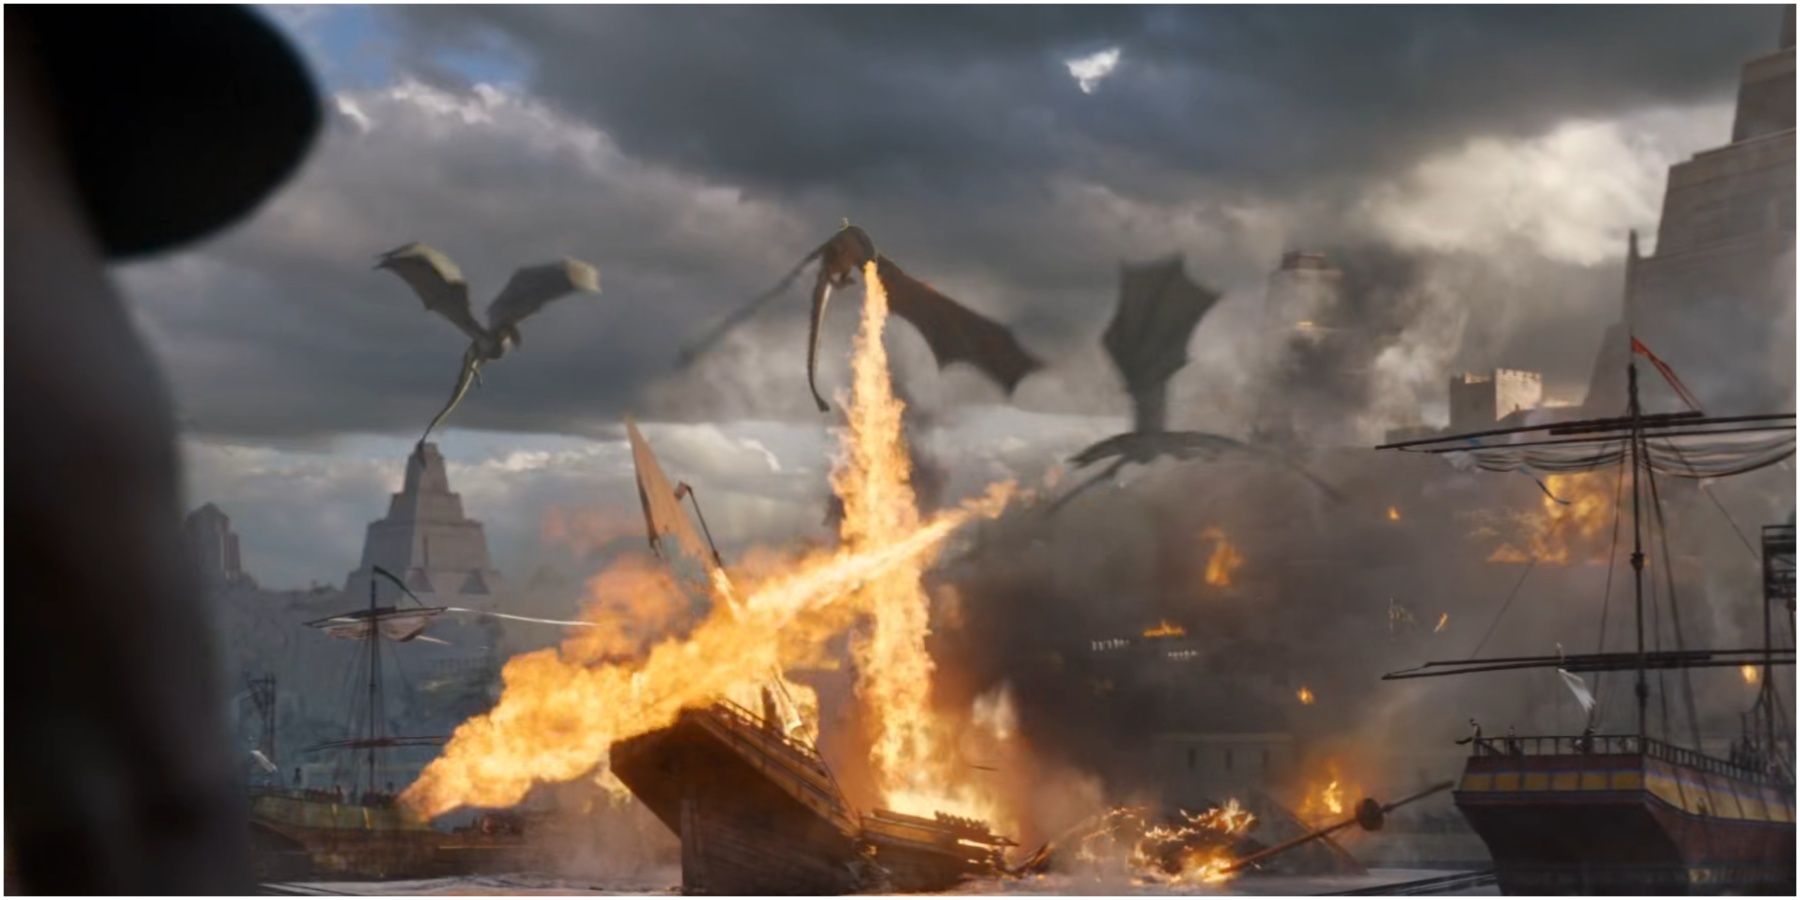 Drogon Viserion and Rhaegal burning ships in Game of Thrones.